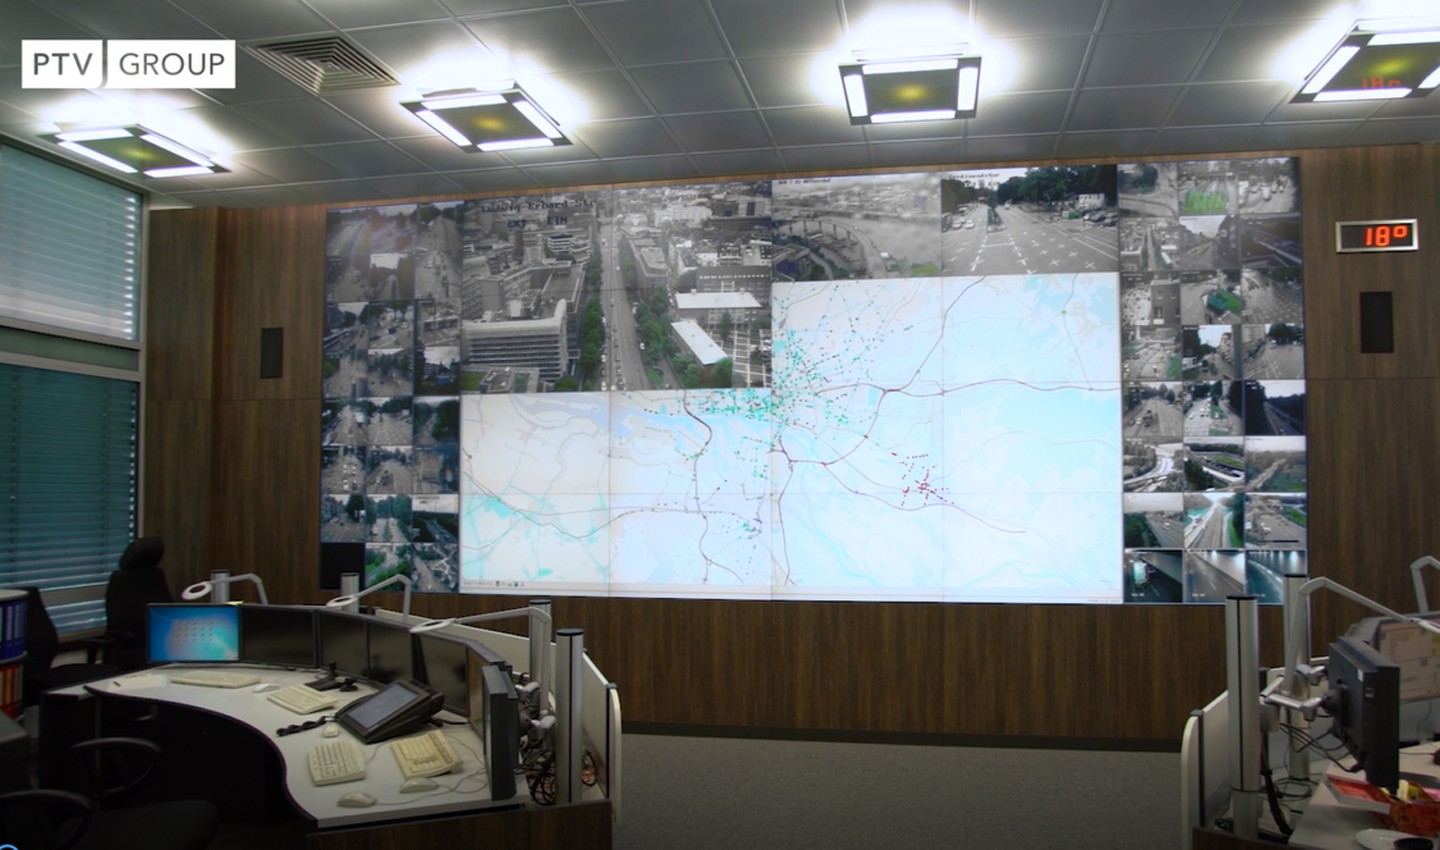 An image of a traffic control center in Hamburg.